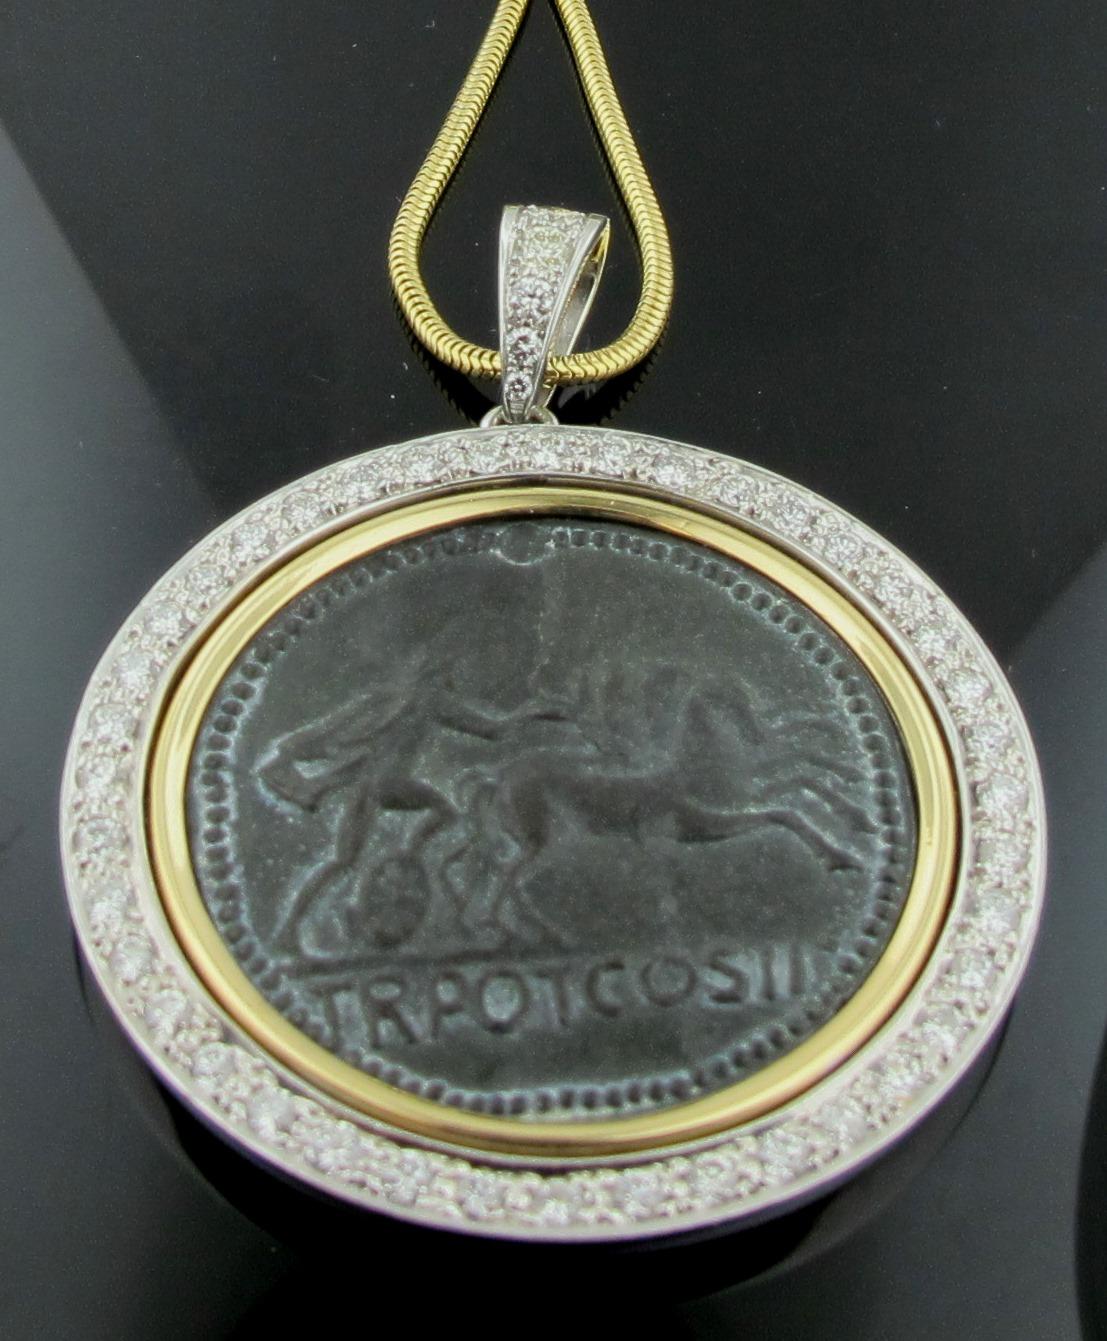 Set in 18 karat yellow gold is a Roman Coin surrounded with 40 round brilliant cut diamonds for a total diamond weight of 2.00 carats, plus 5 round brilliant cut diamonds in the bale for a total weight of 0.50 carats.  Total diamond weight is 2.50